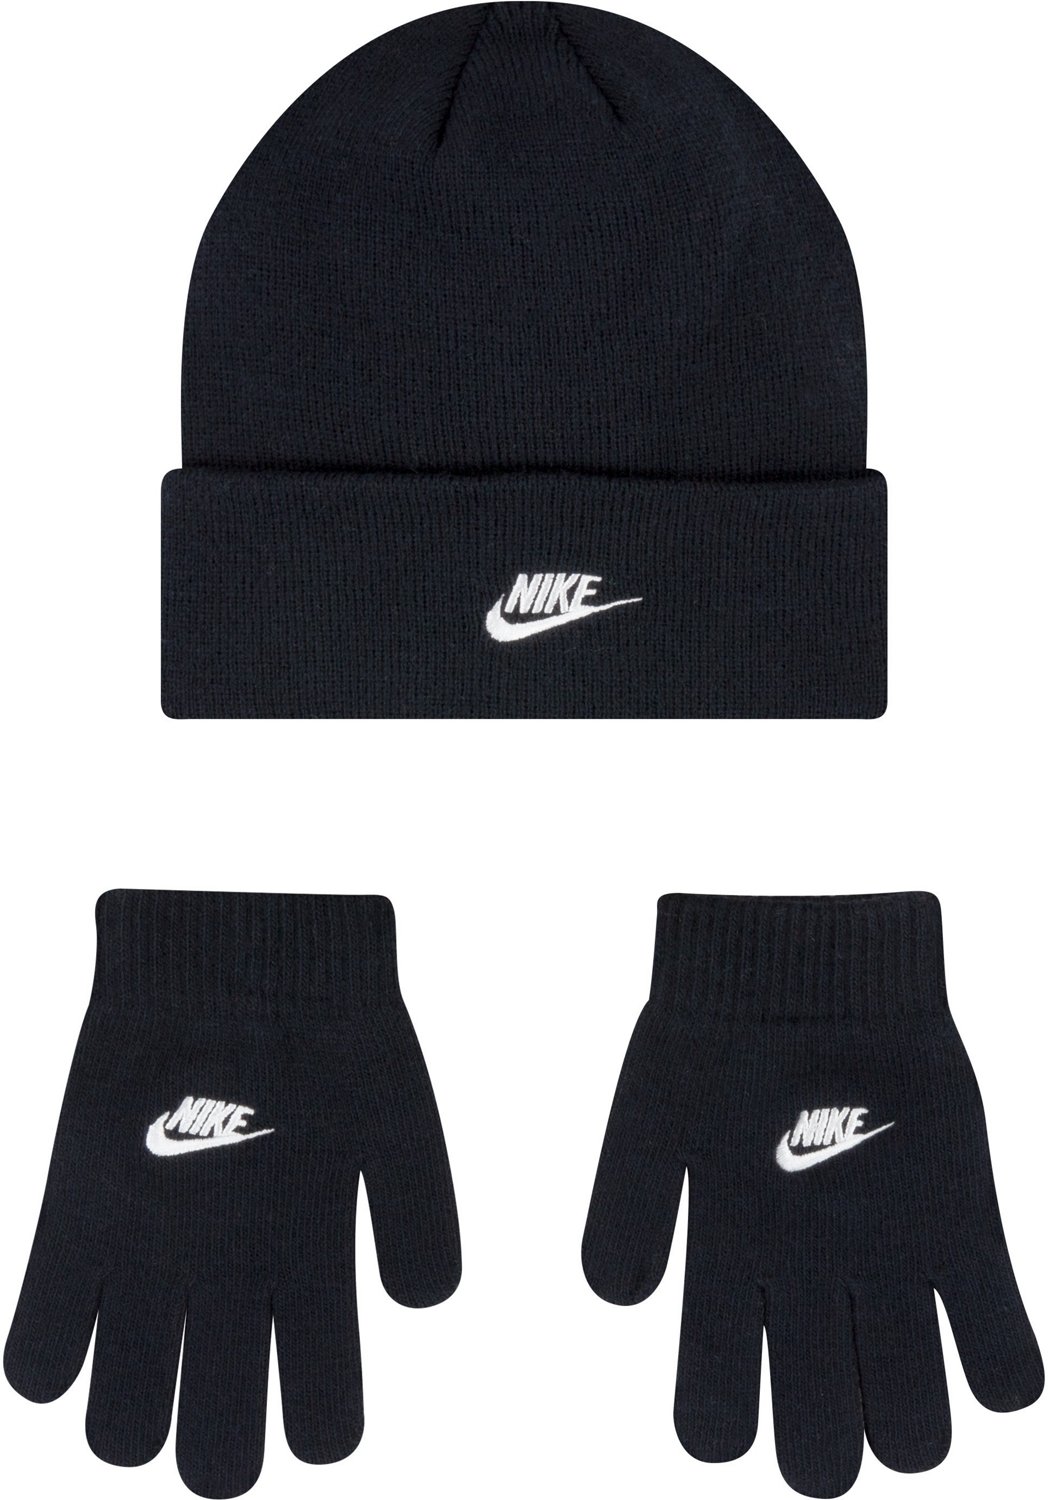 Nike Boys' Beanie and Glove Set | Free Shipping at Academy